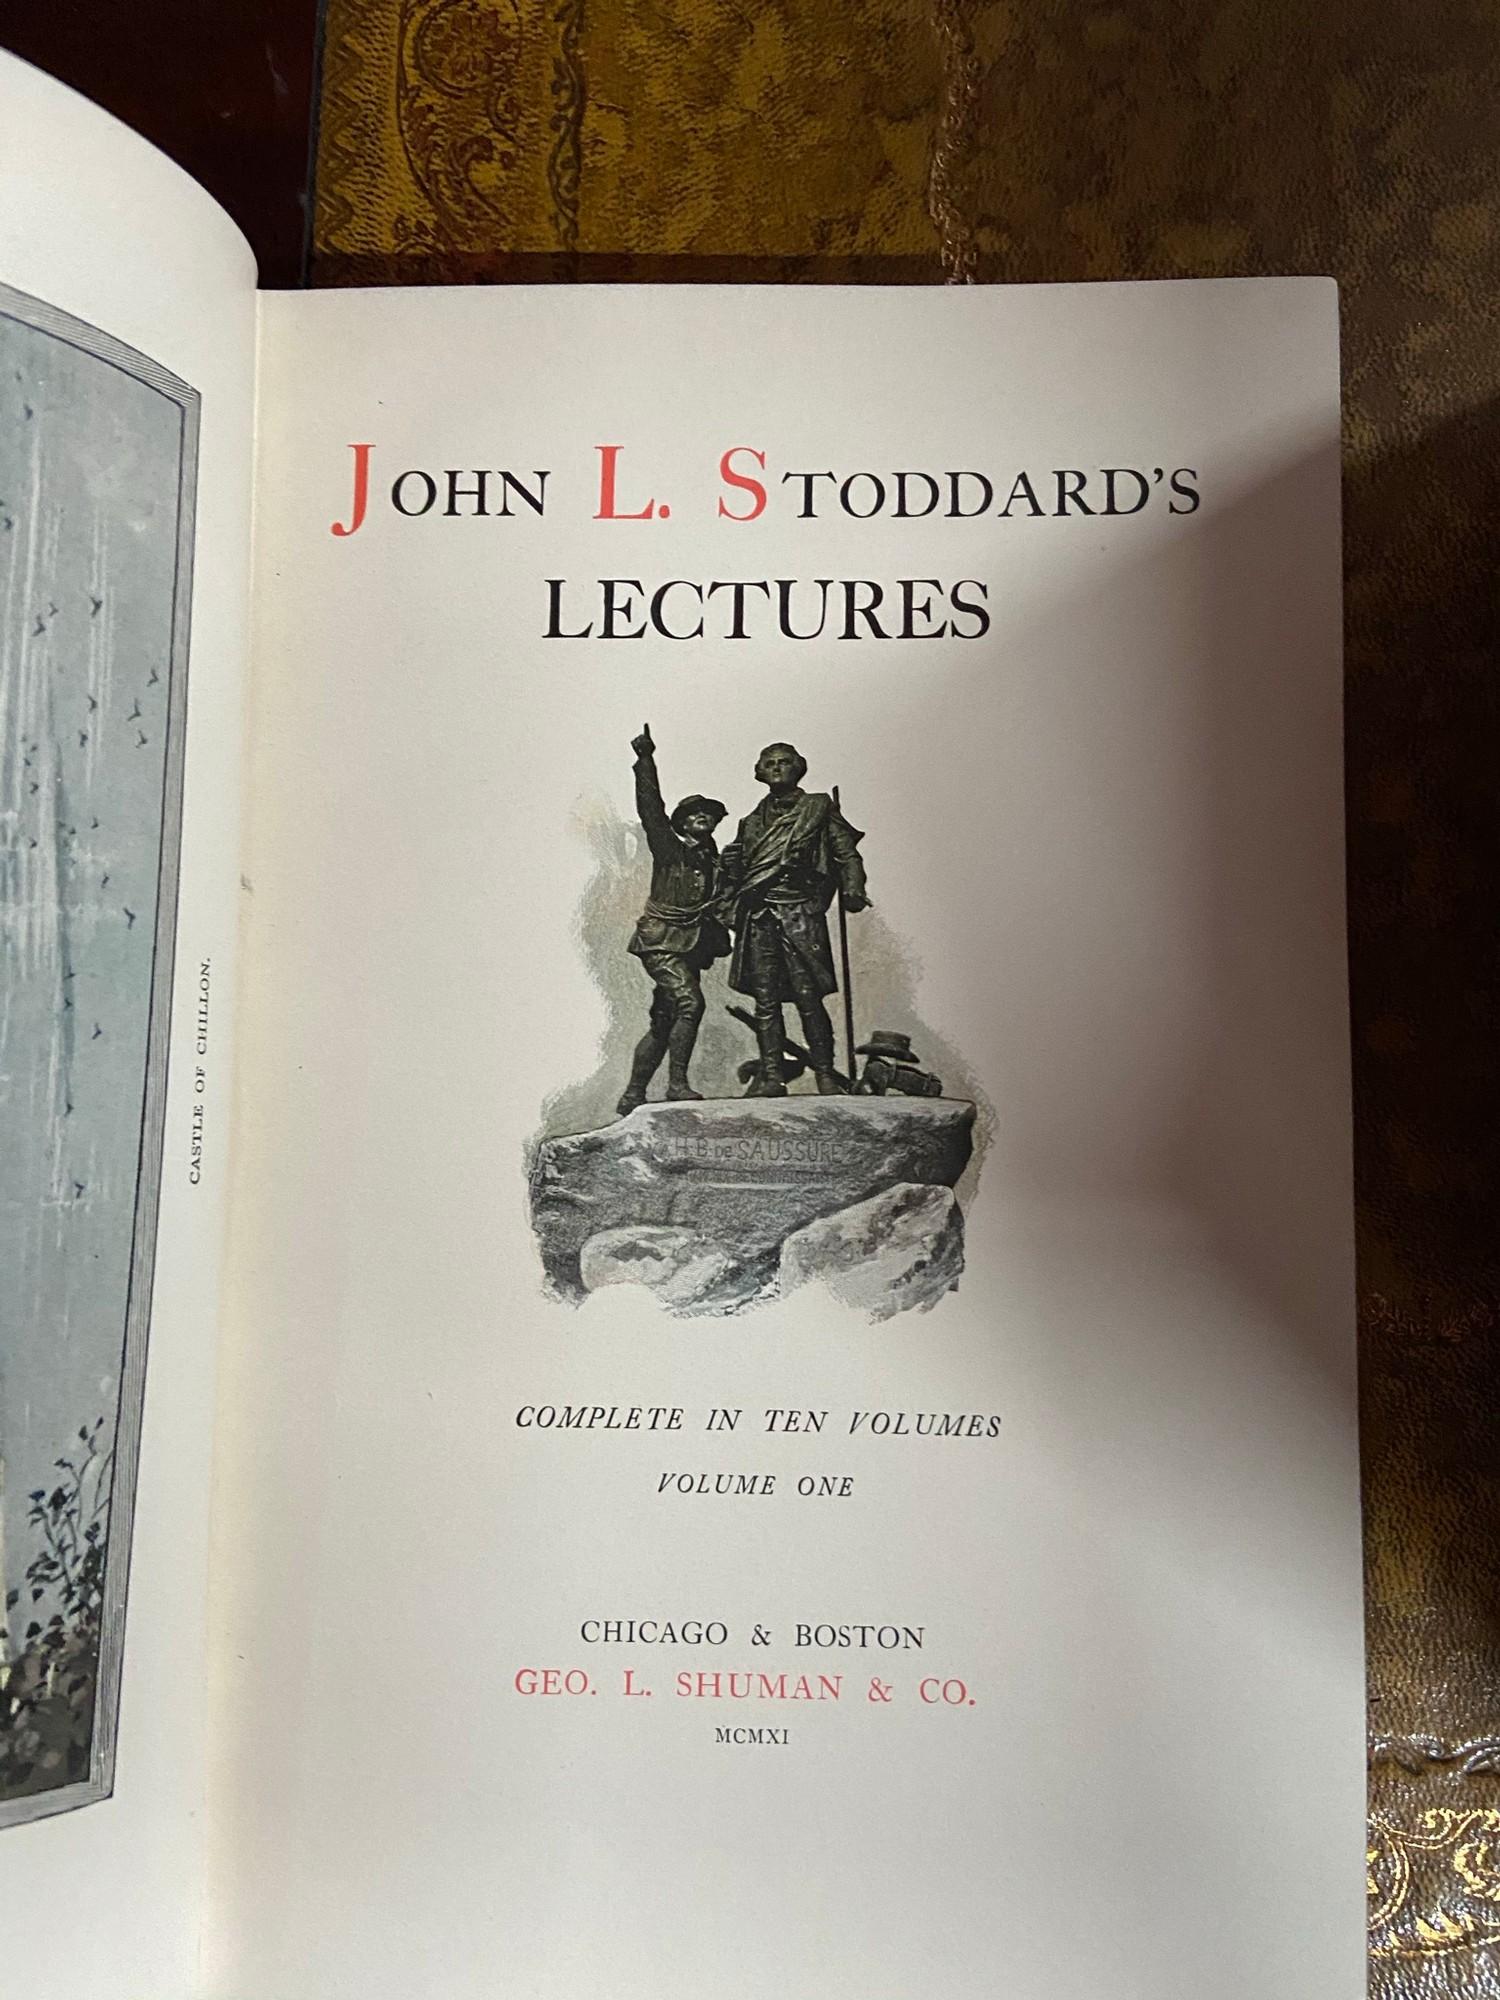 A Collections of Stoddard's Lectures books - Image 2 of 6